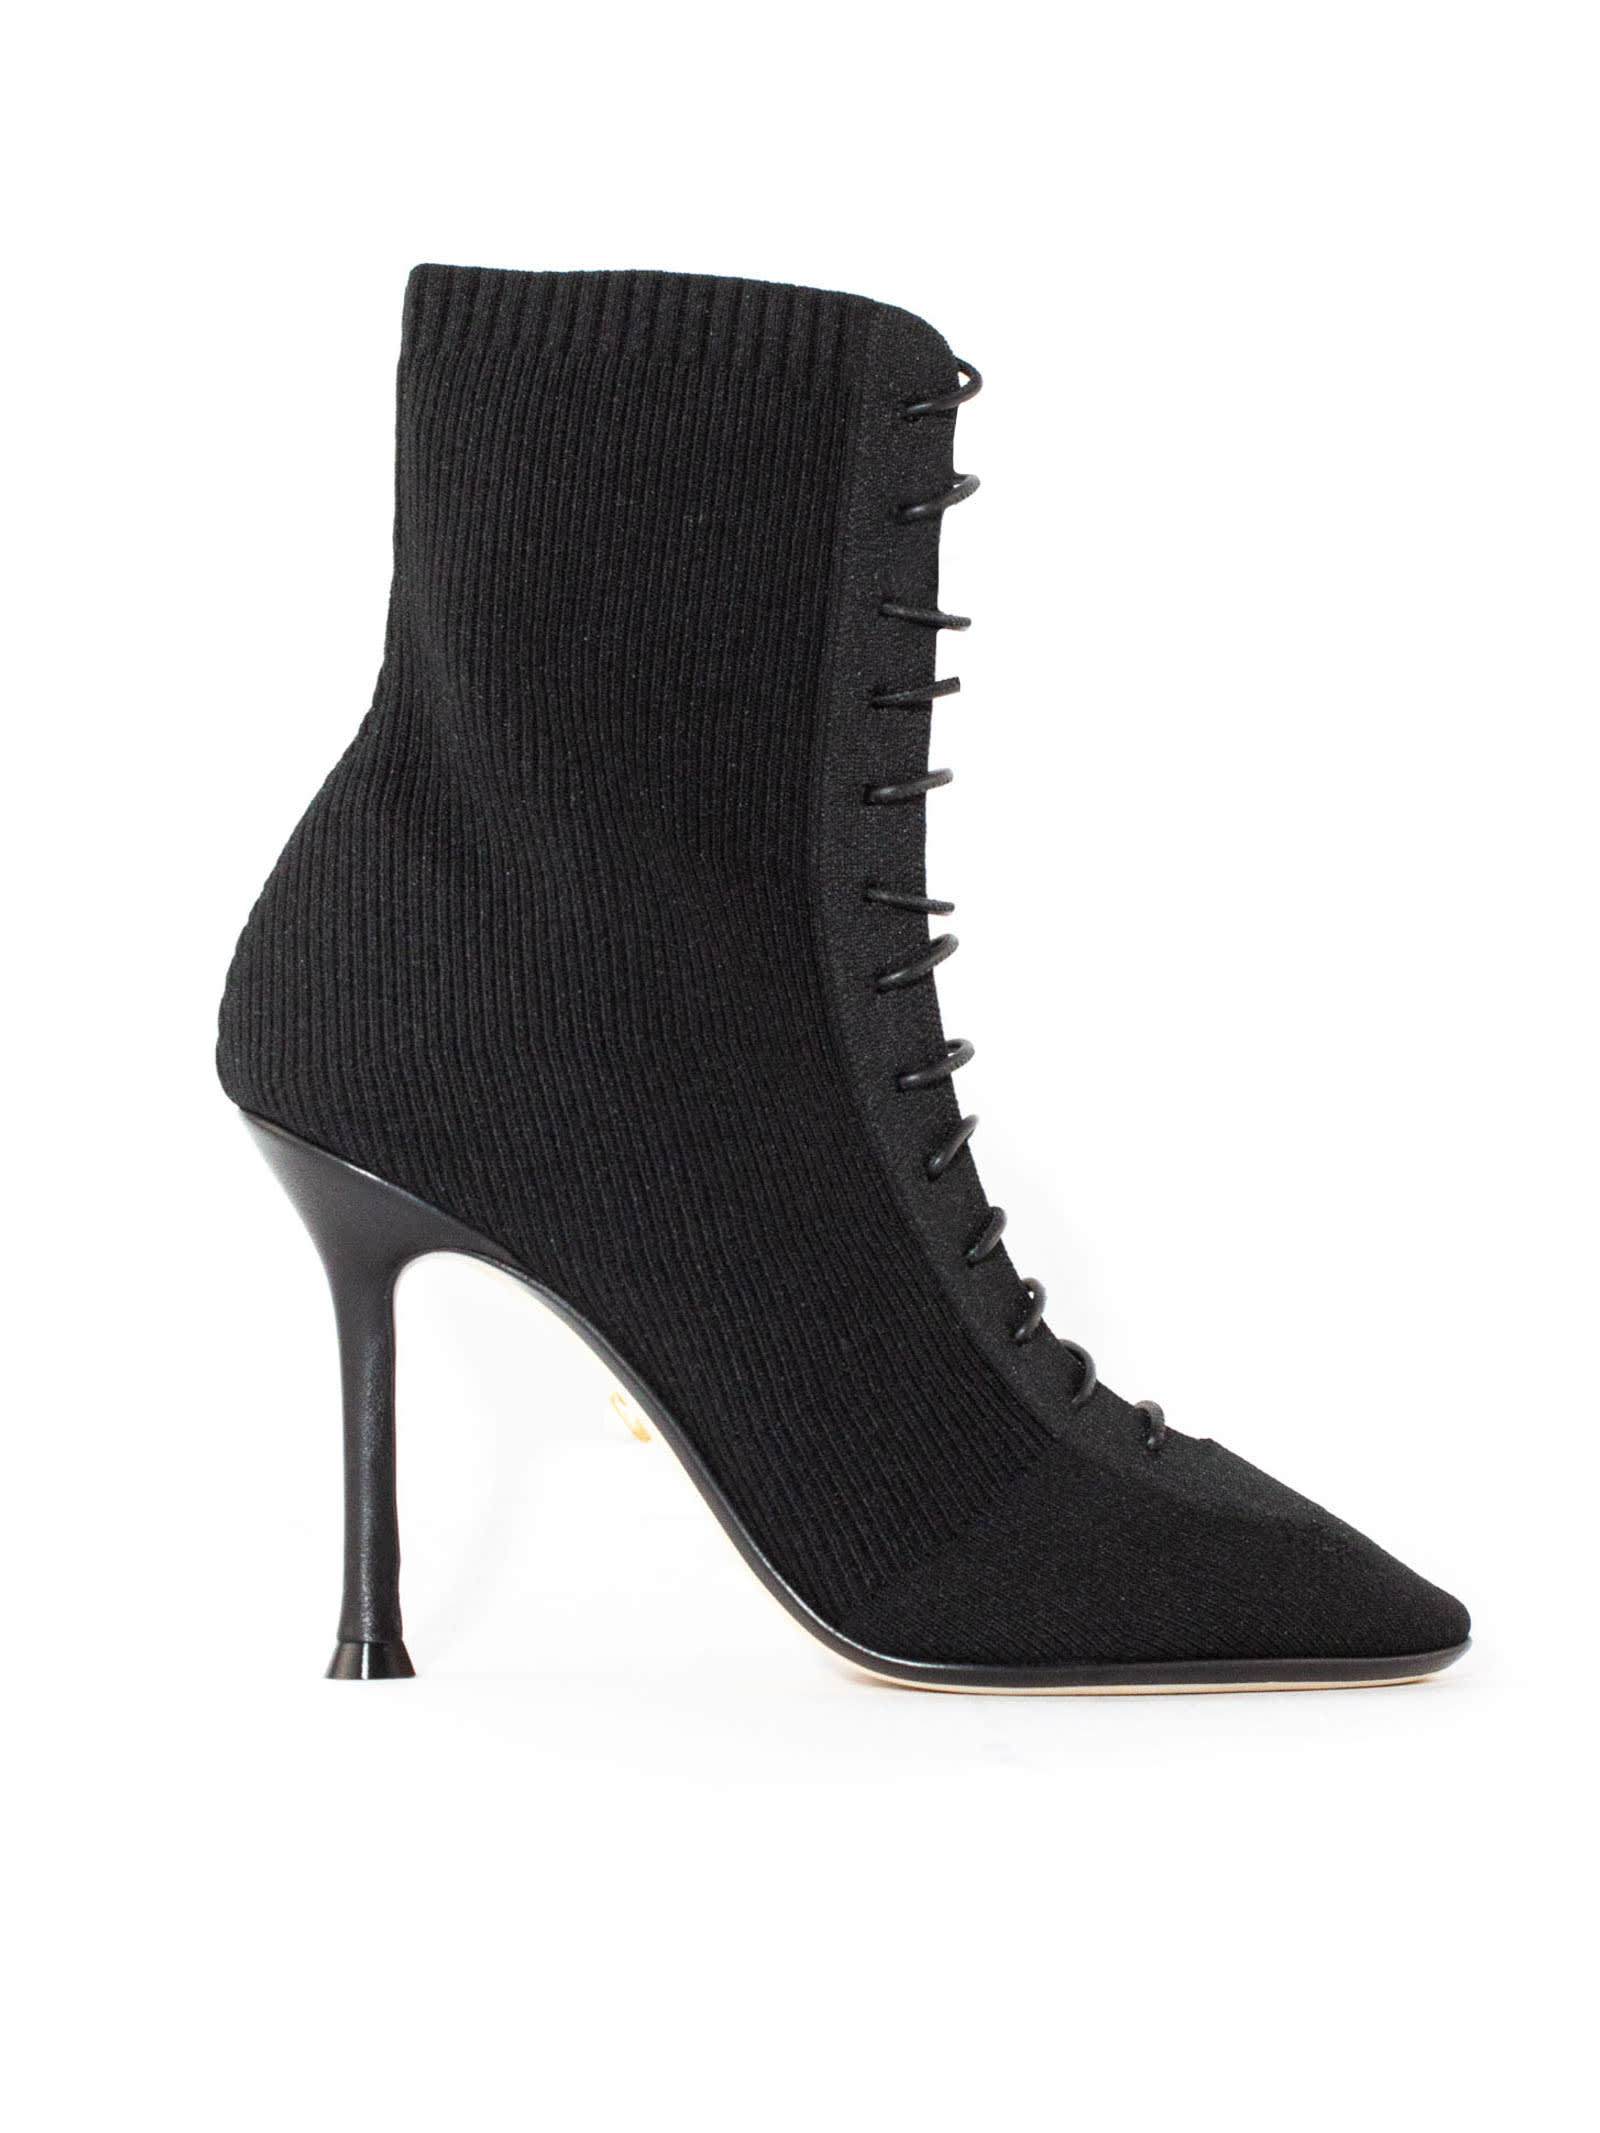 Black Knit Ankle Boots